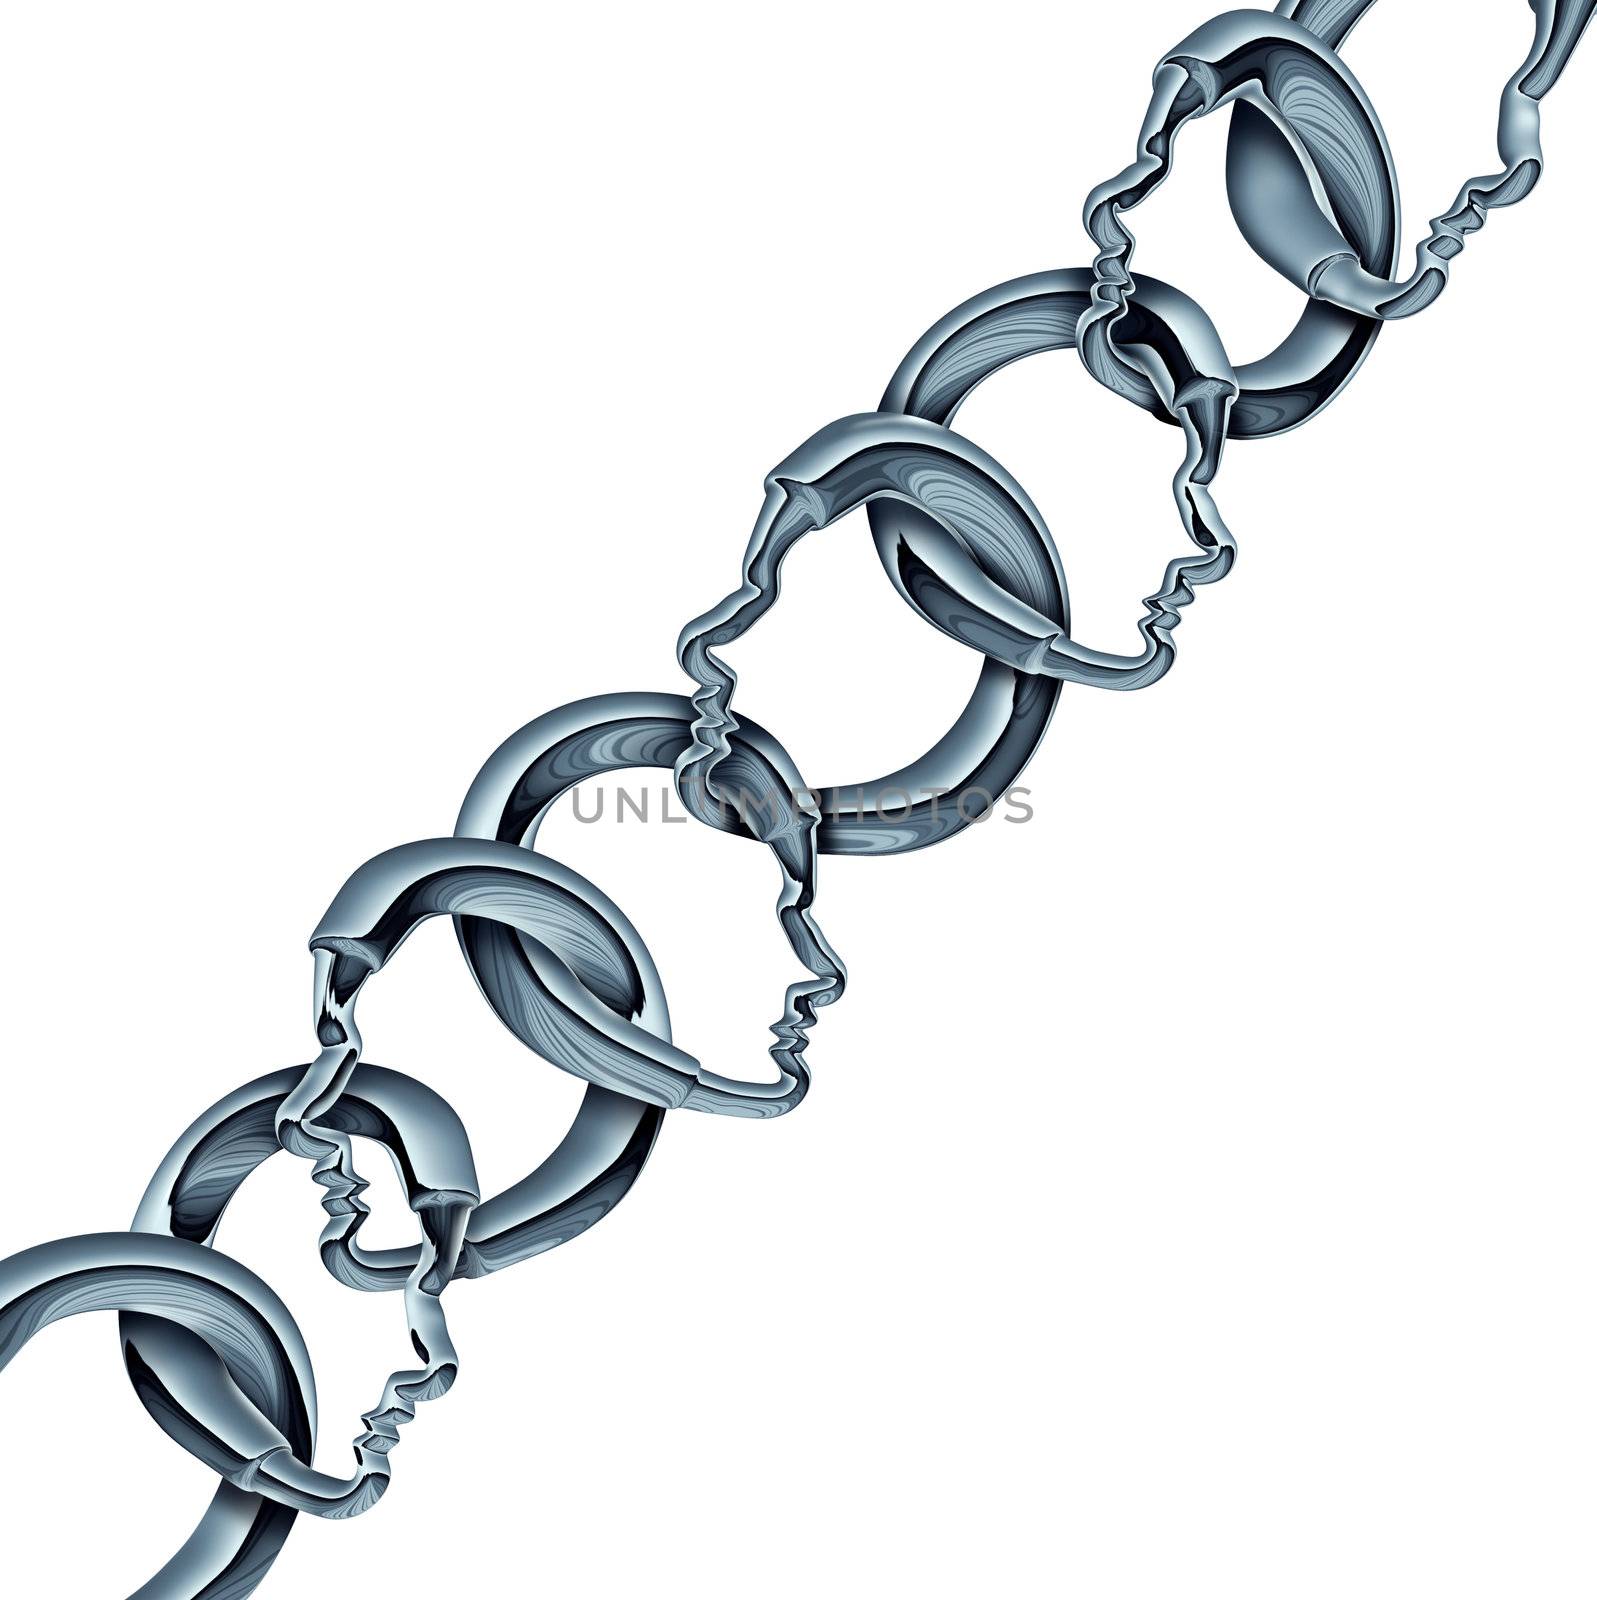 Group of people strength as metal chain links in the shape of three dimensional human heads representing business workers meeting and connecting together as a strong partnership.